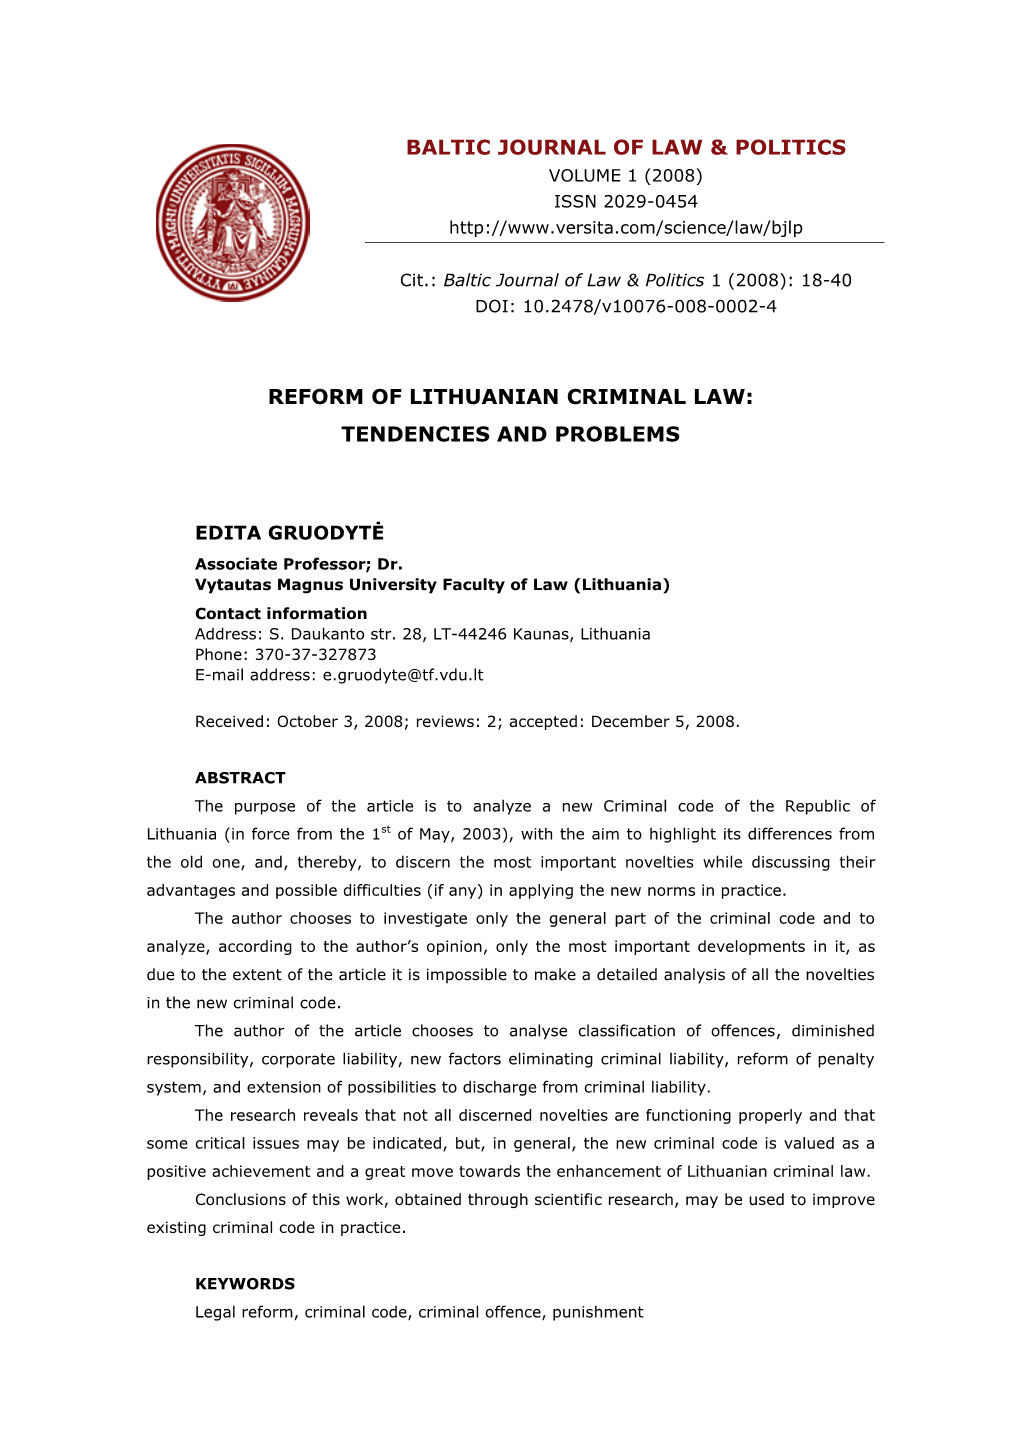 Reform of Lithuanian Criminal Law: Tendencies and Problems